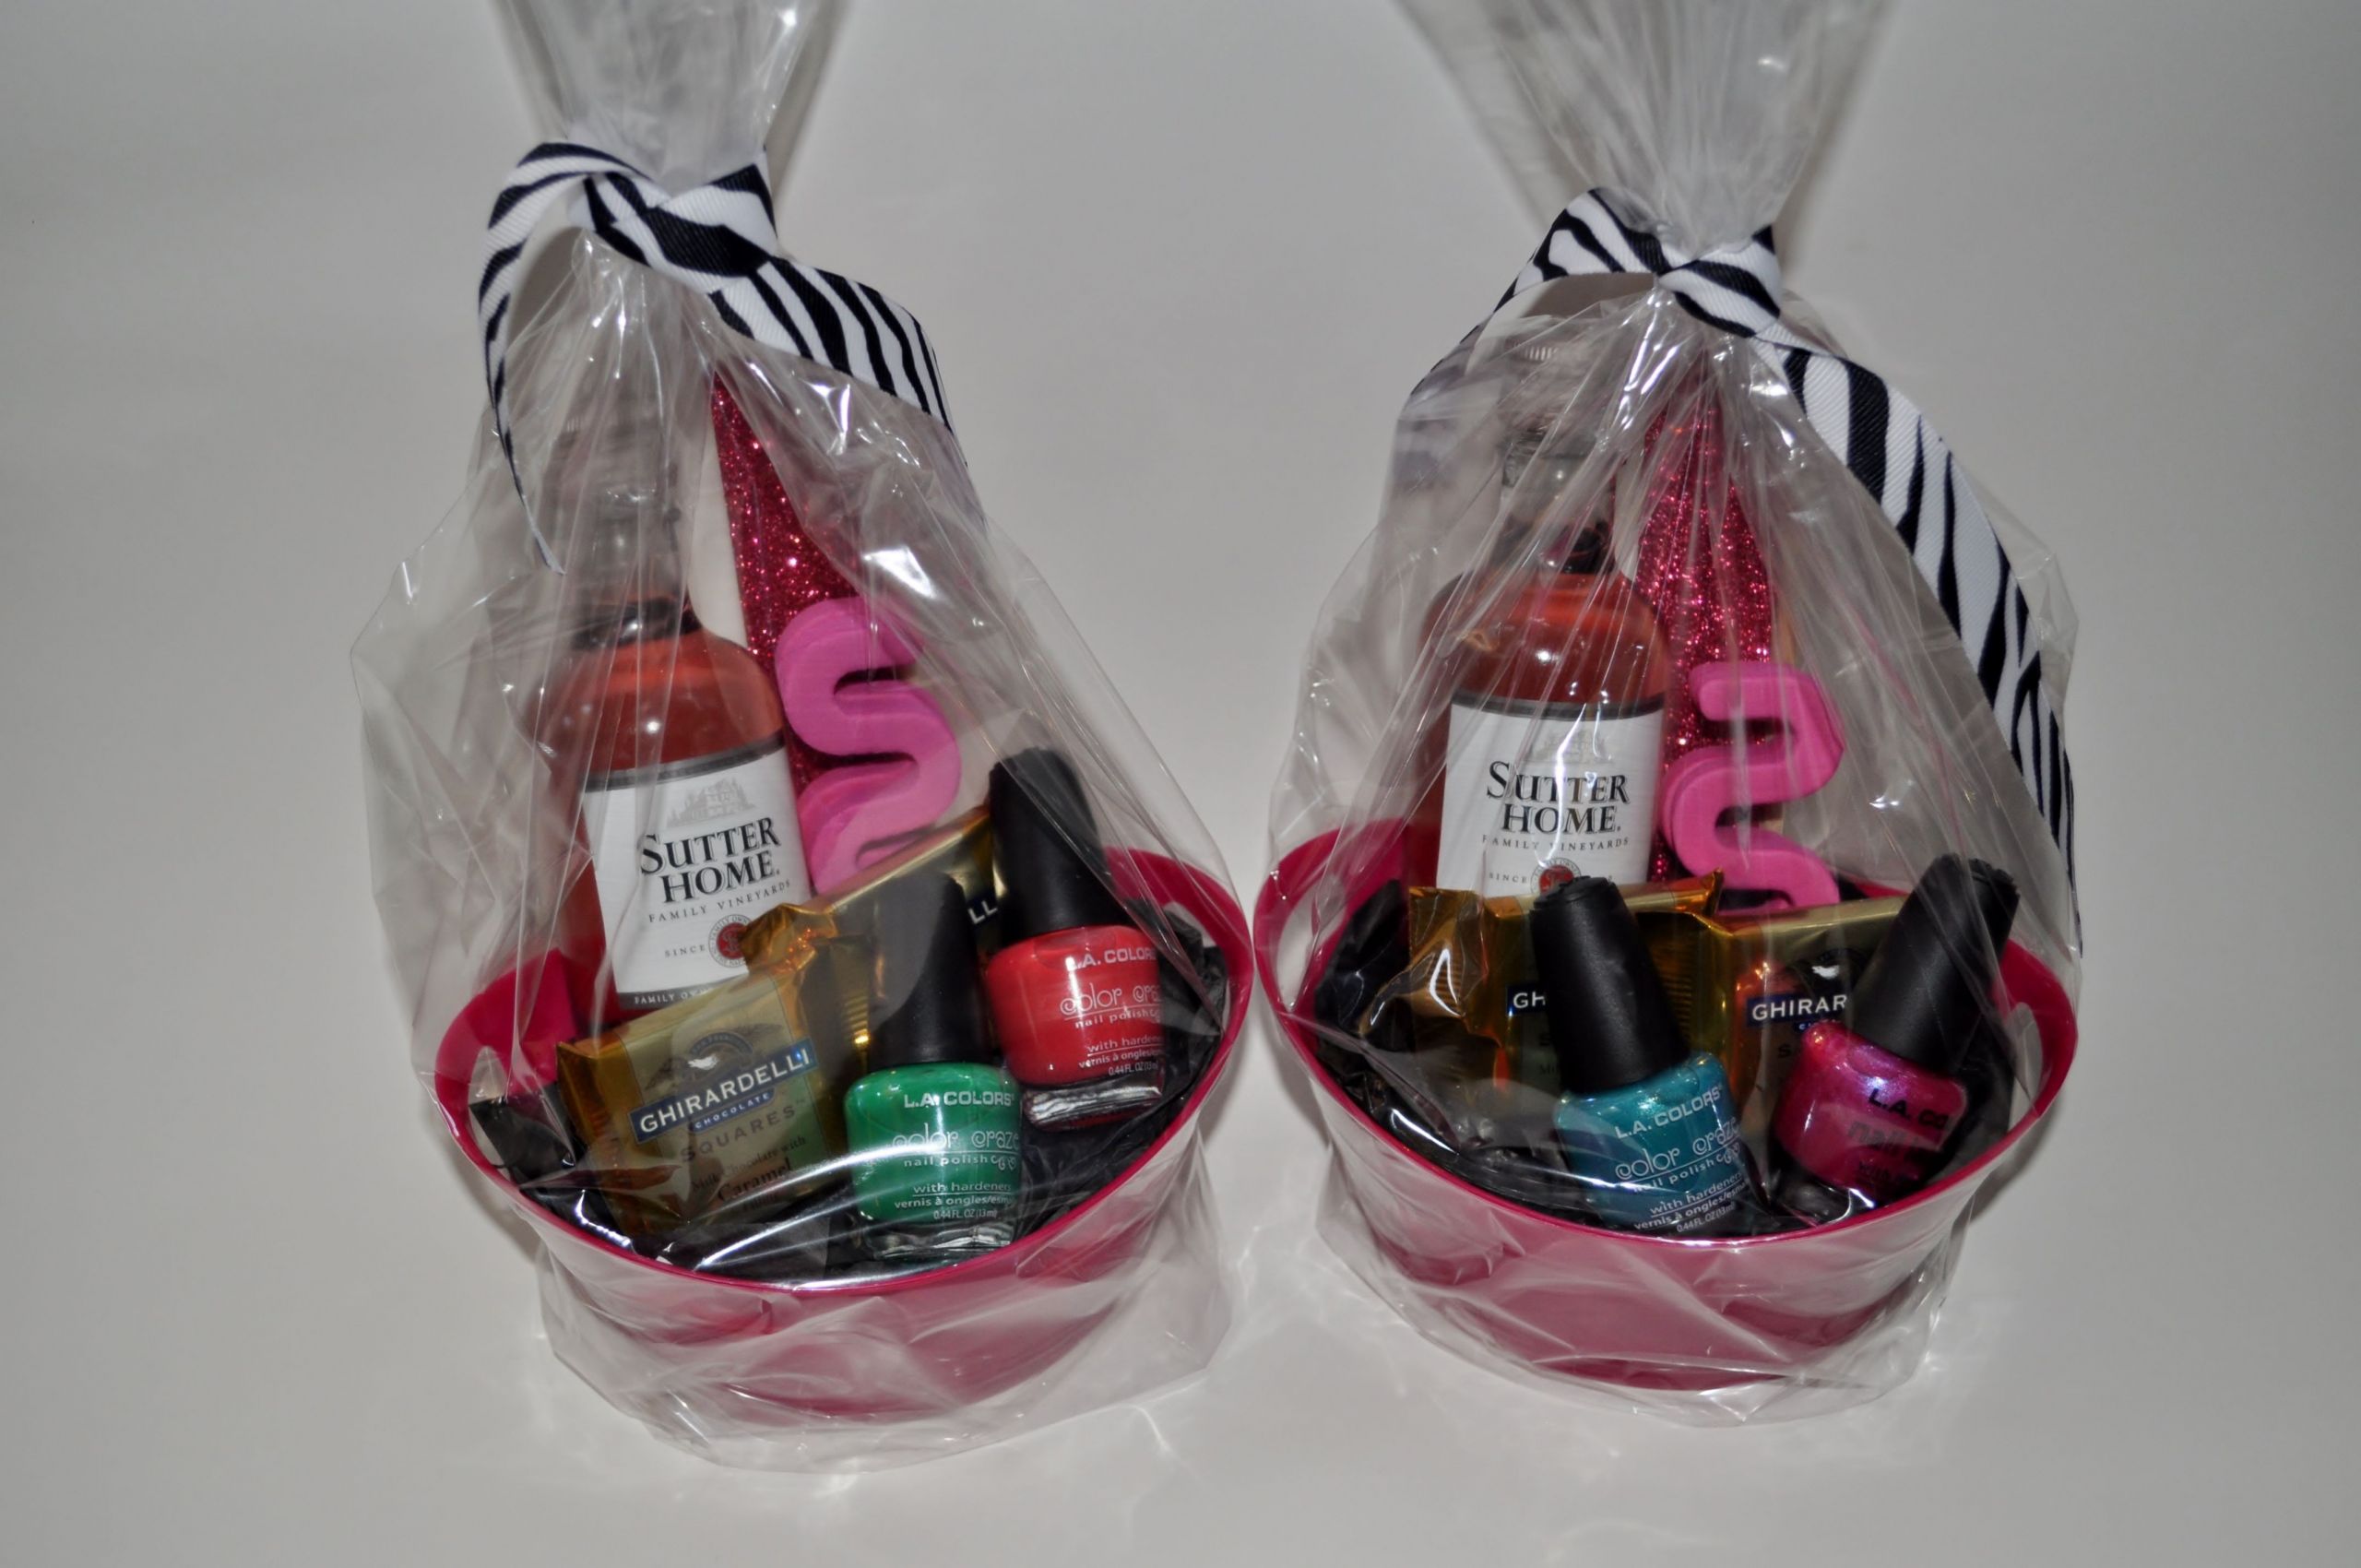 Girls Night Out Gift Ideas
 Gift Baskets for Girls Night Out